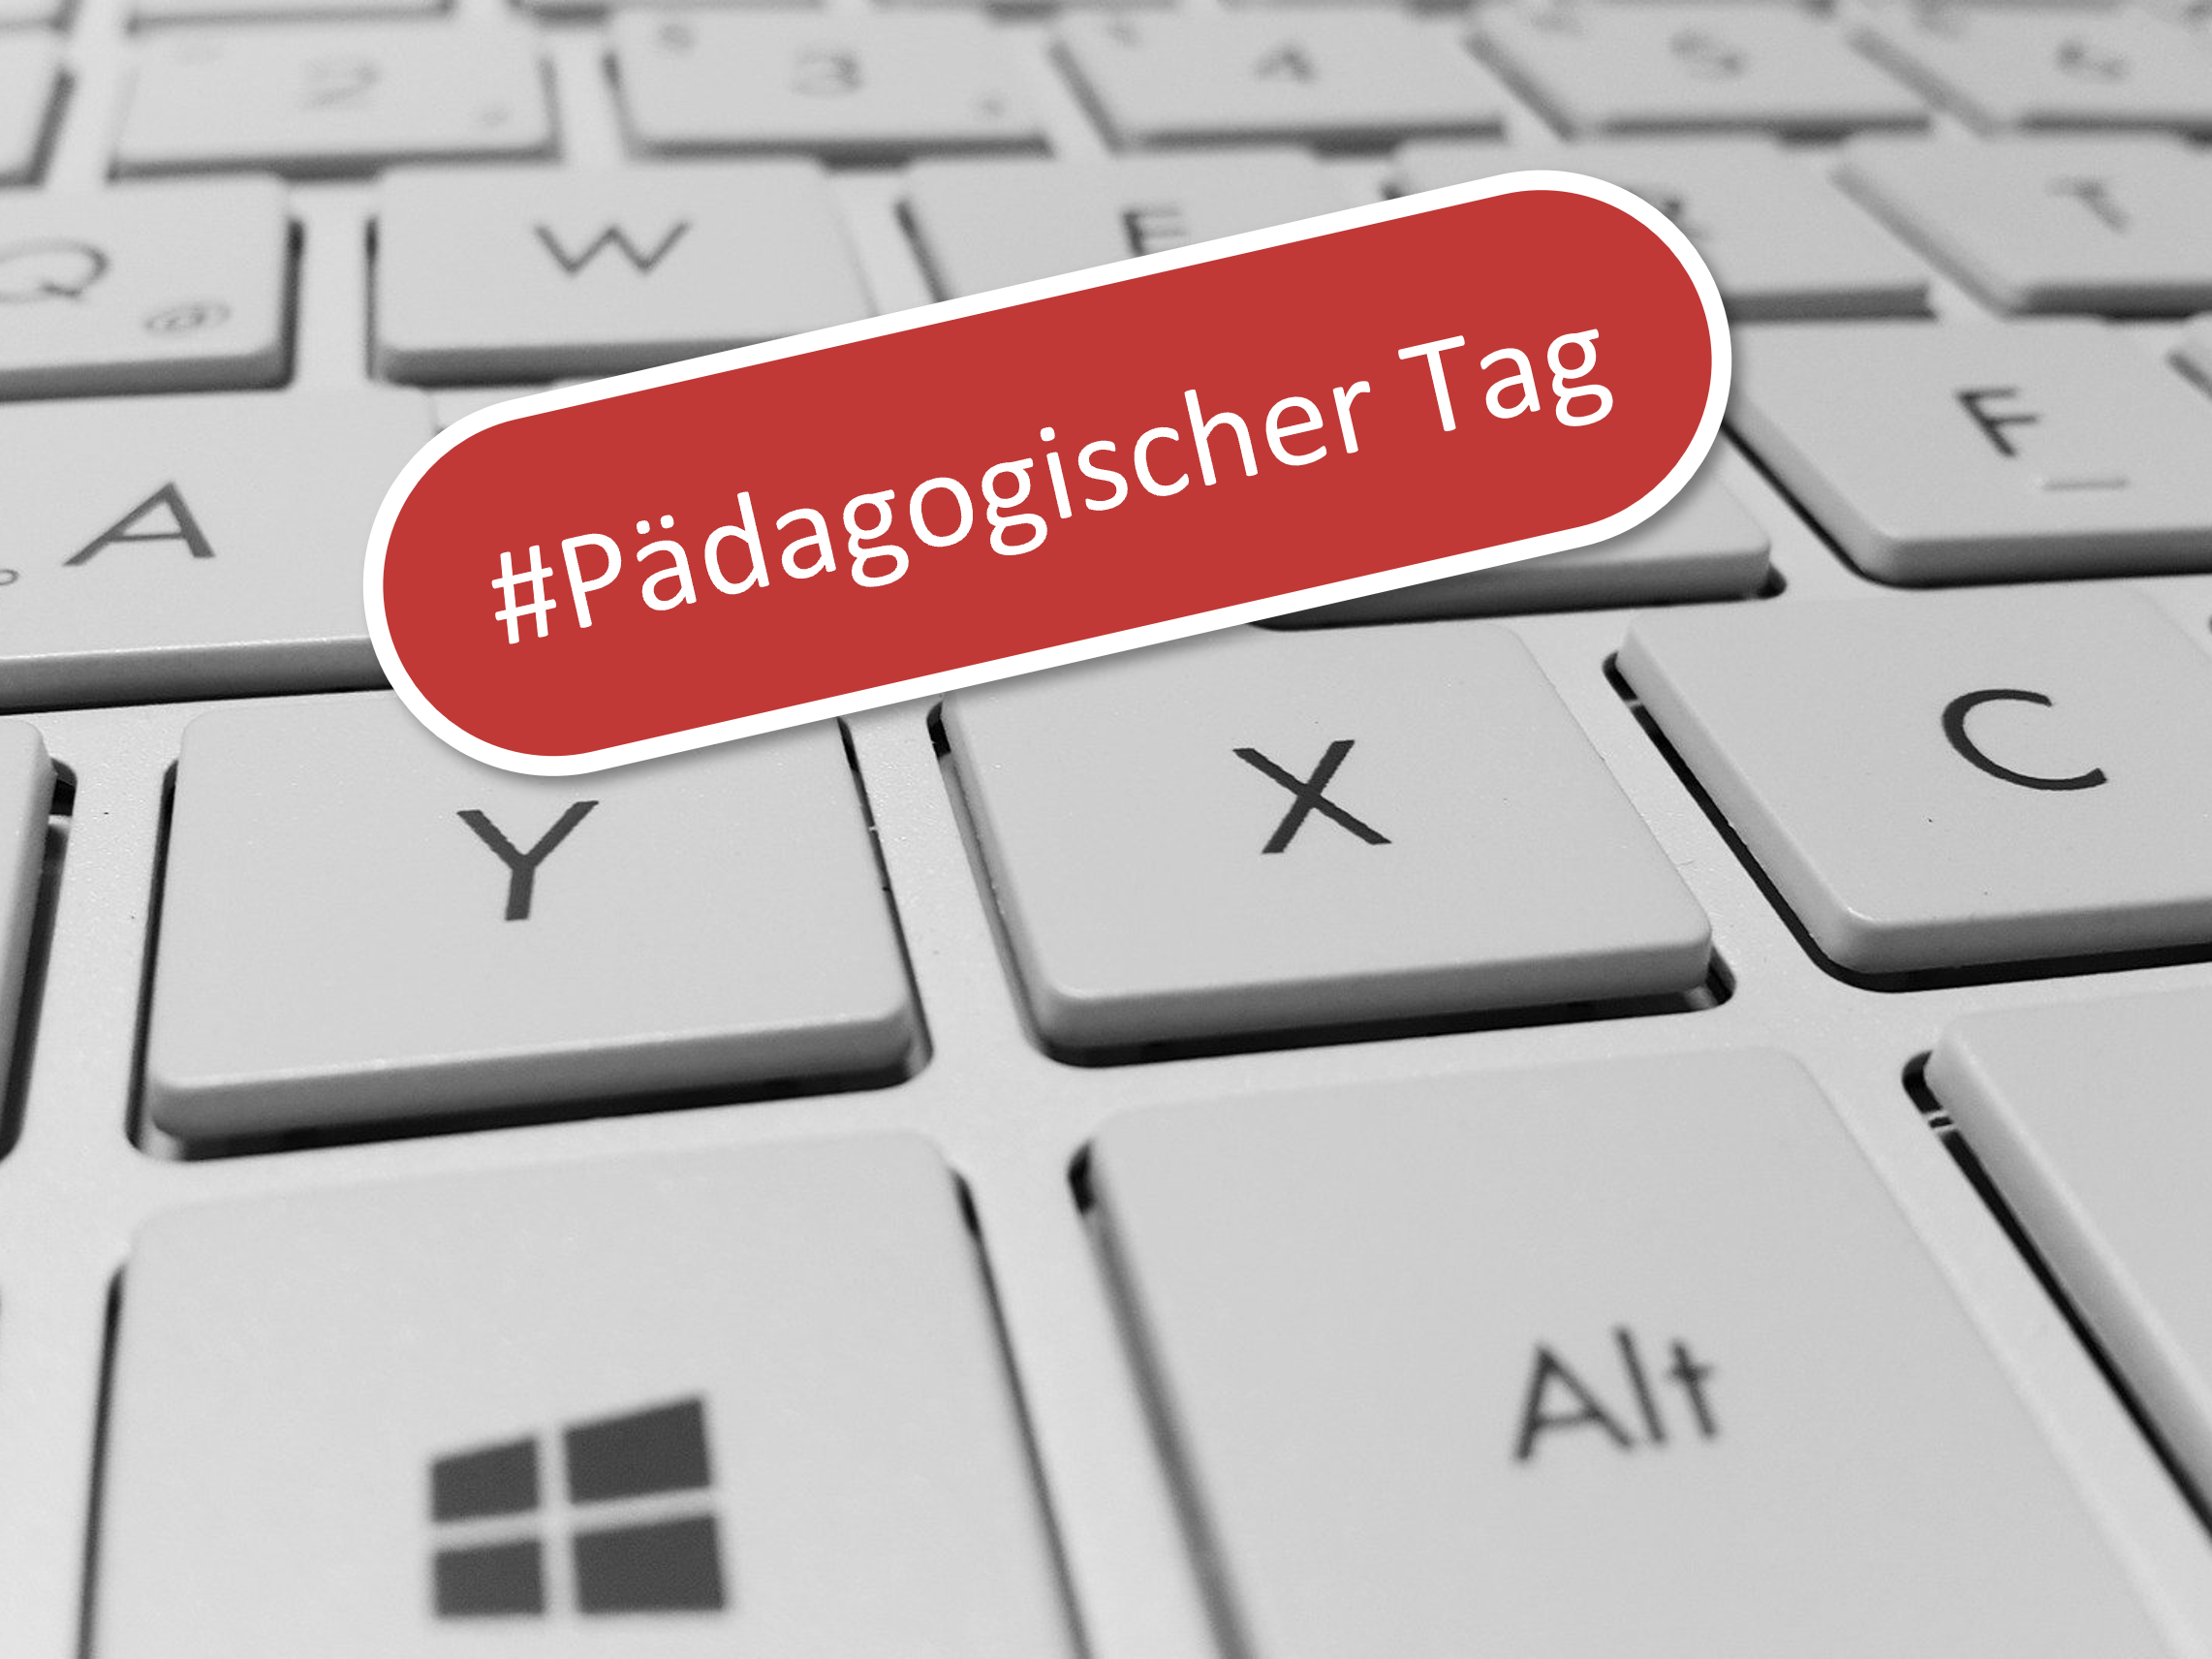 You are currently viewing Pädagogischer Tag am 16.02.2022